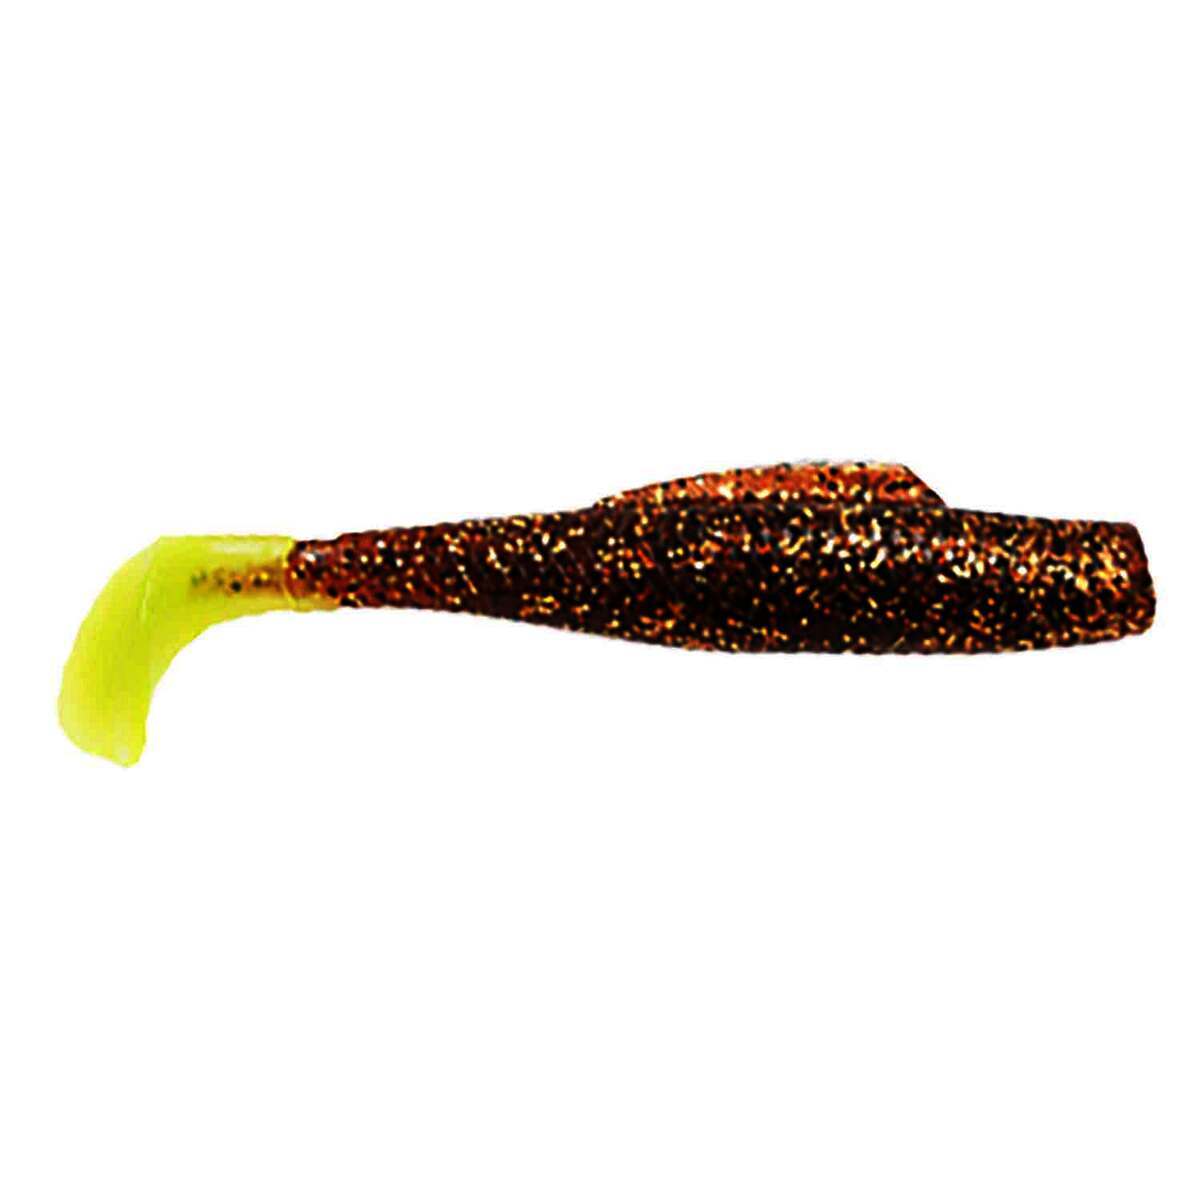 Z Man MinnowZ Soft Bait - Rootbeer/Chartreuse Tail, 3in